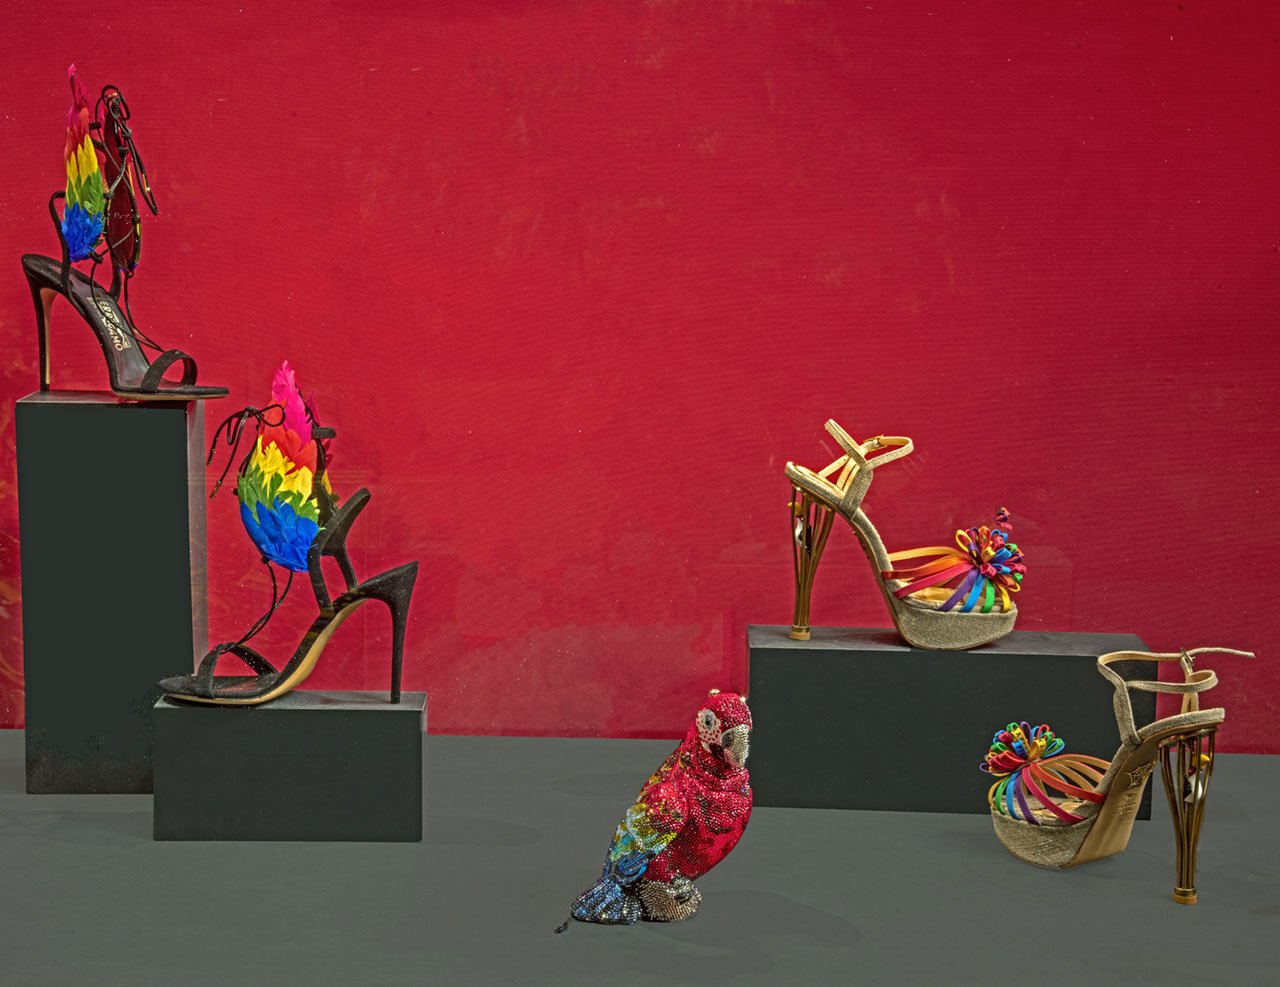 Exhibition view (from left to right):
Salvatore Ferragamo, Sandals. Capsule Collection by Edgardo Osorio, Spring / Summer 2016, Florence, Salvatore Ferragamo Museum.
Judith Leiber Couture, "Scarlet" parrot clutch, 2018.
Charlotte Olympia, "Birds of Paradise" sandals, Capsule Collection 2018.
Photo © Antonio Quattrone.